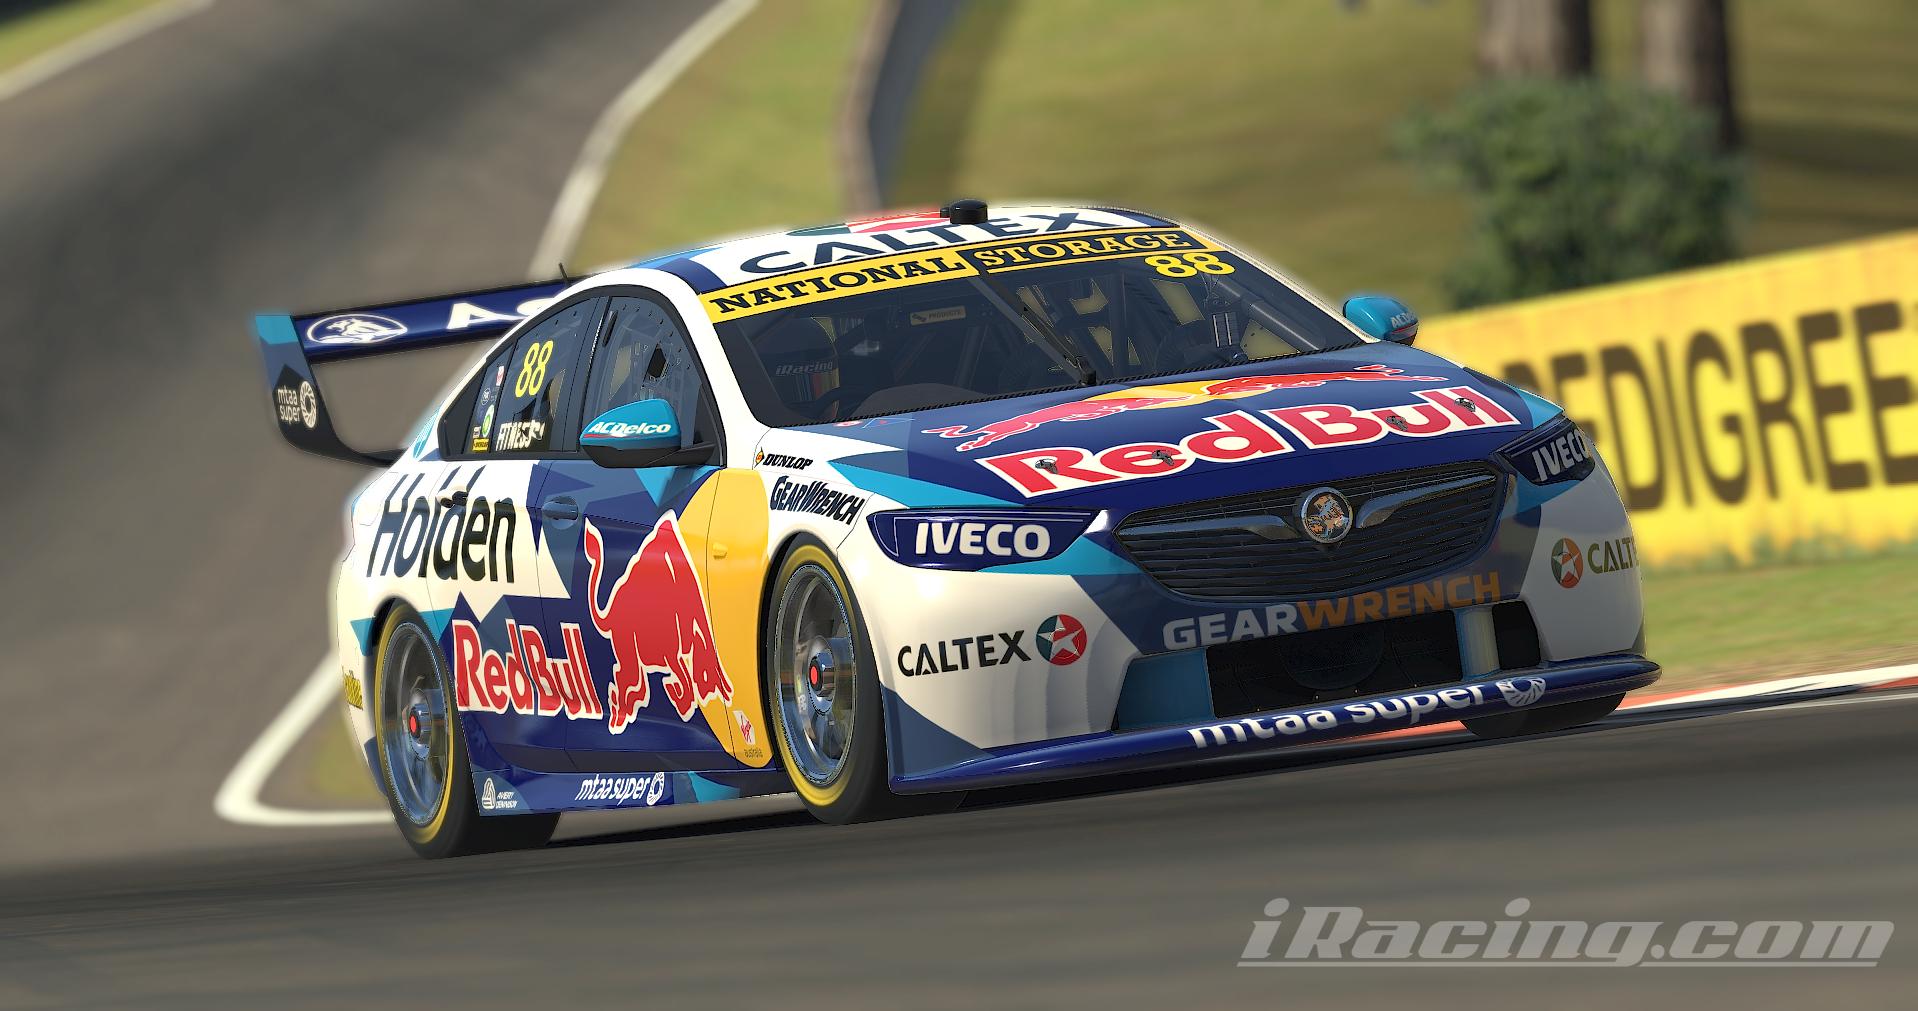 Preview of 2020 RedBull Holden Racing by Rob Fitness